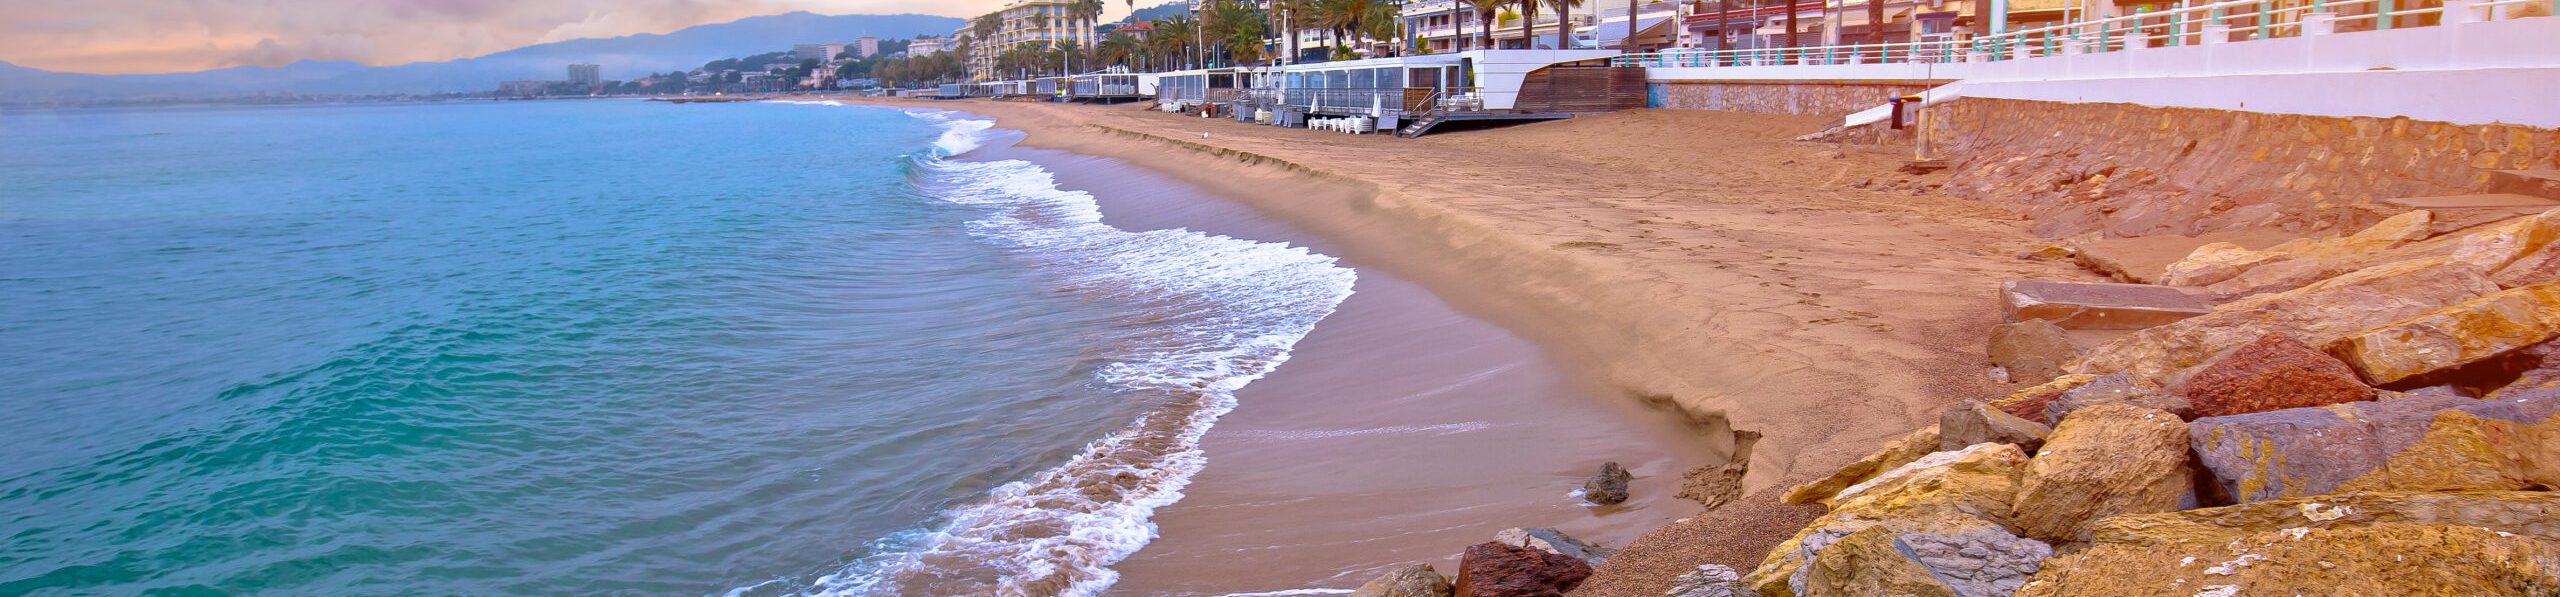 Cannes.,Idyllic,Palm,Waterfront,And,Sand,Beach,In,Cannes,Sun